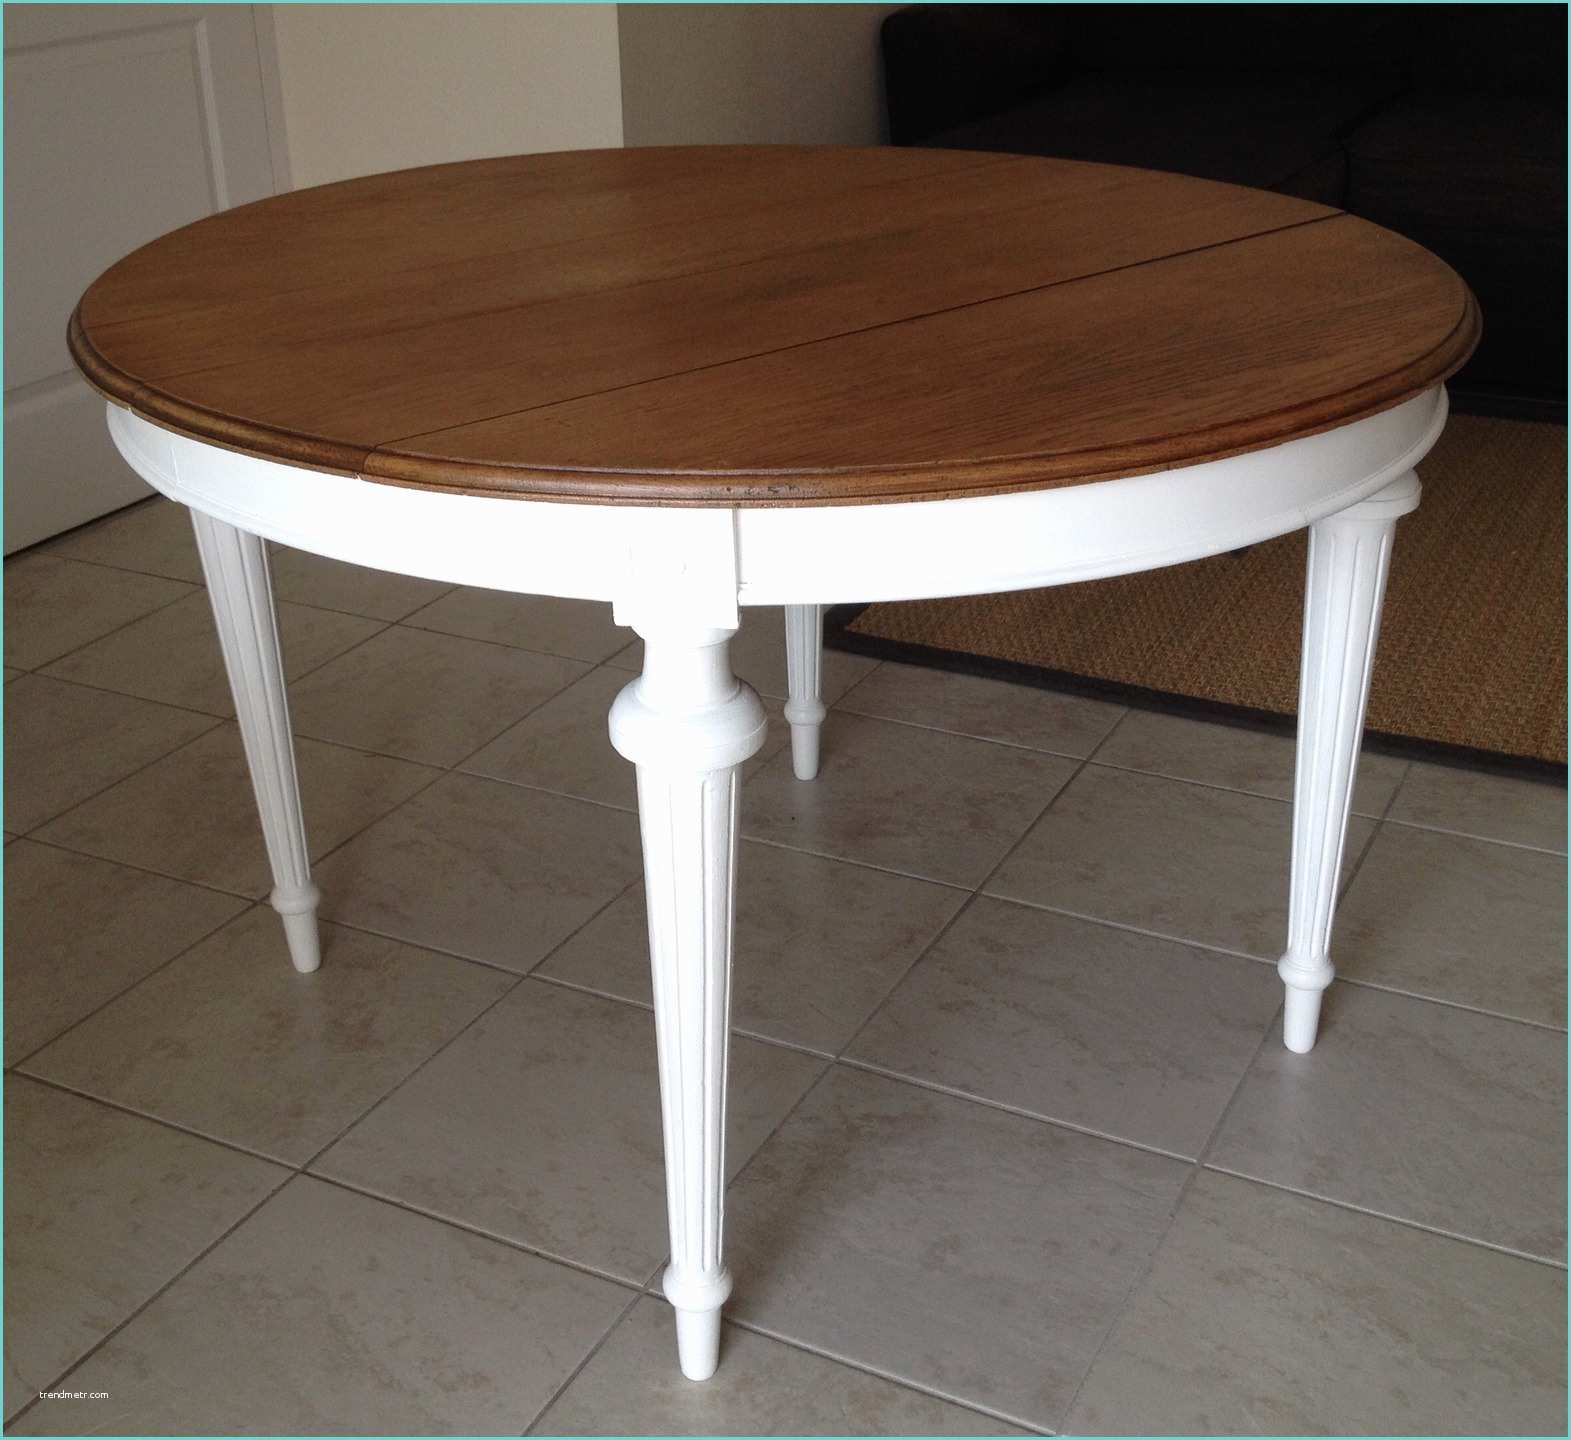 Table Ronde Blanche Table Ronde Blanche Et Bois Table Ronde